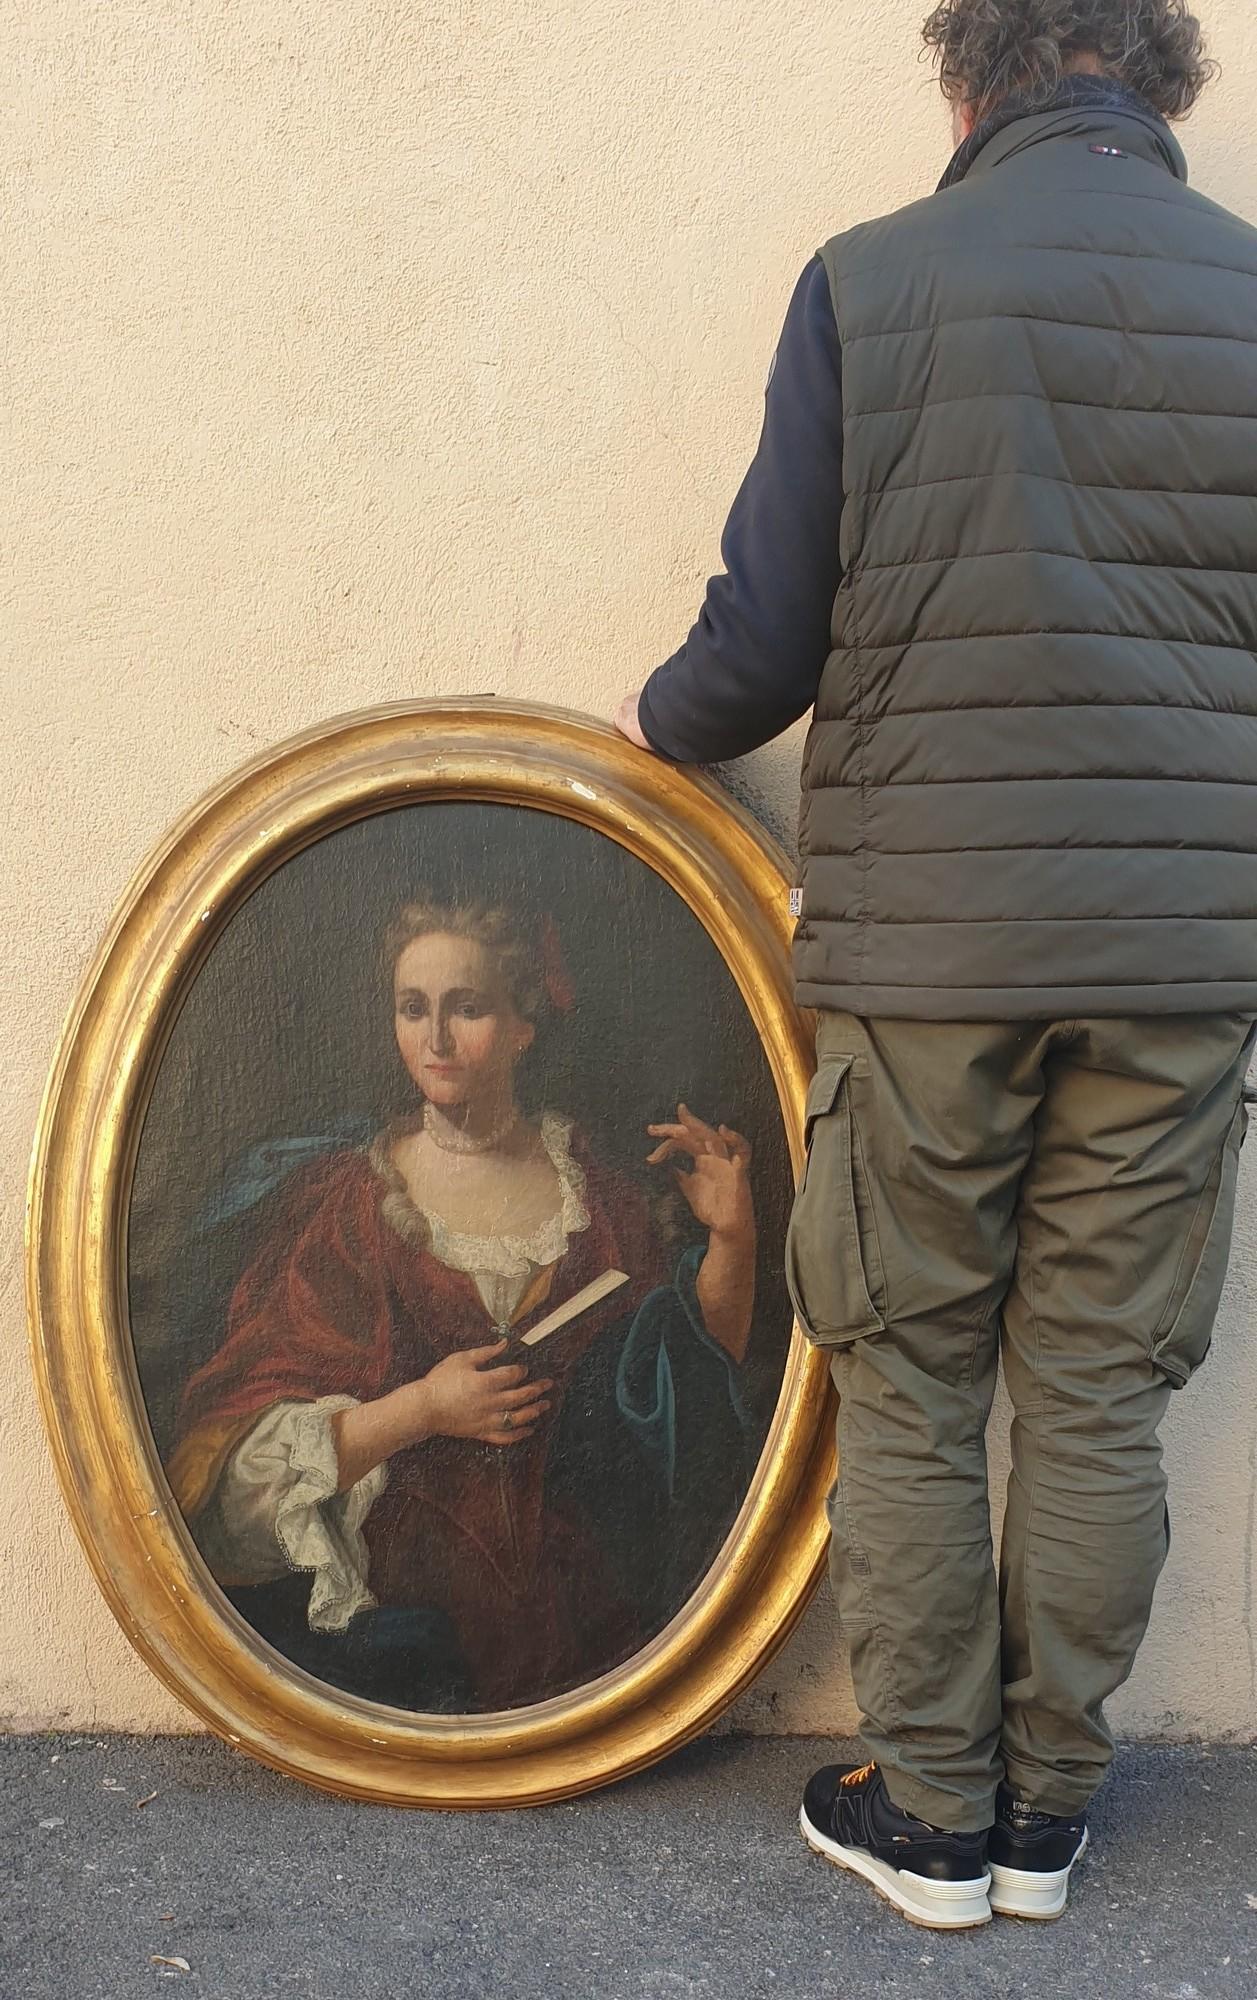 Oval portrait of a lady of quality, wearing rich jewelry and clothes, a fan in her hand.

Good condition, old restorations, relined, some wear to the frame.

18th century.

Dimensions with frame: 118x93cm.
Dimensions without frame: 97x73cm.